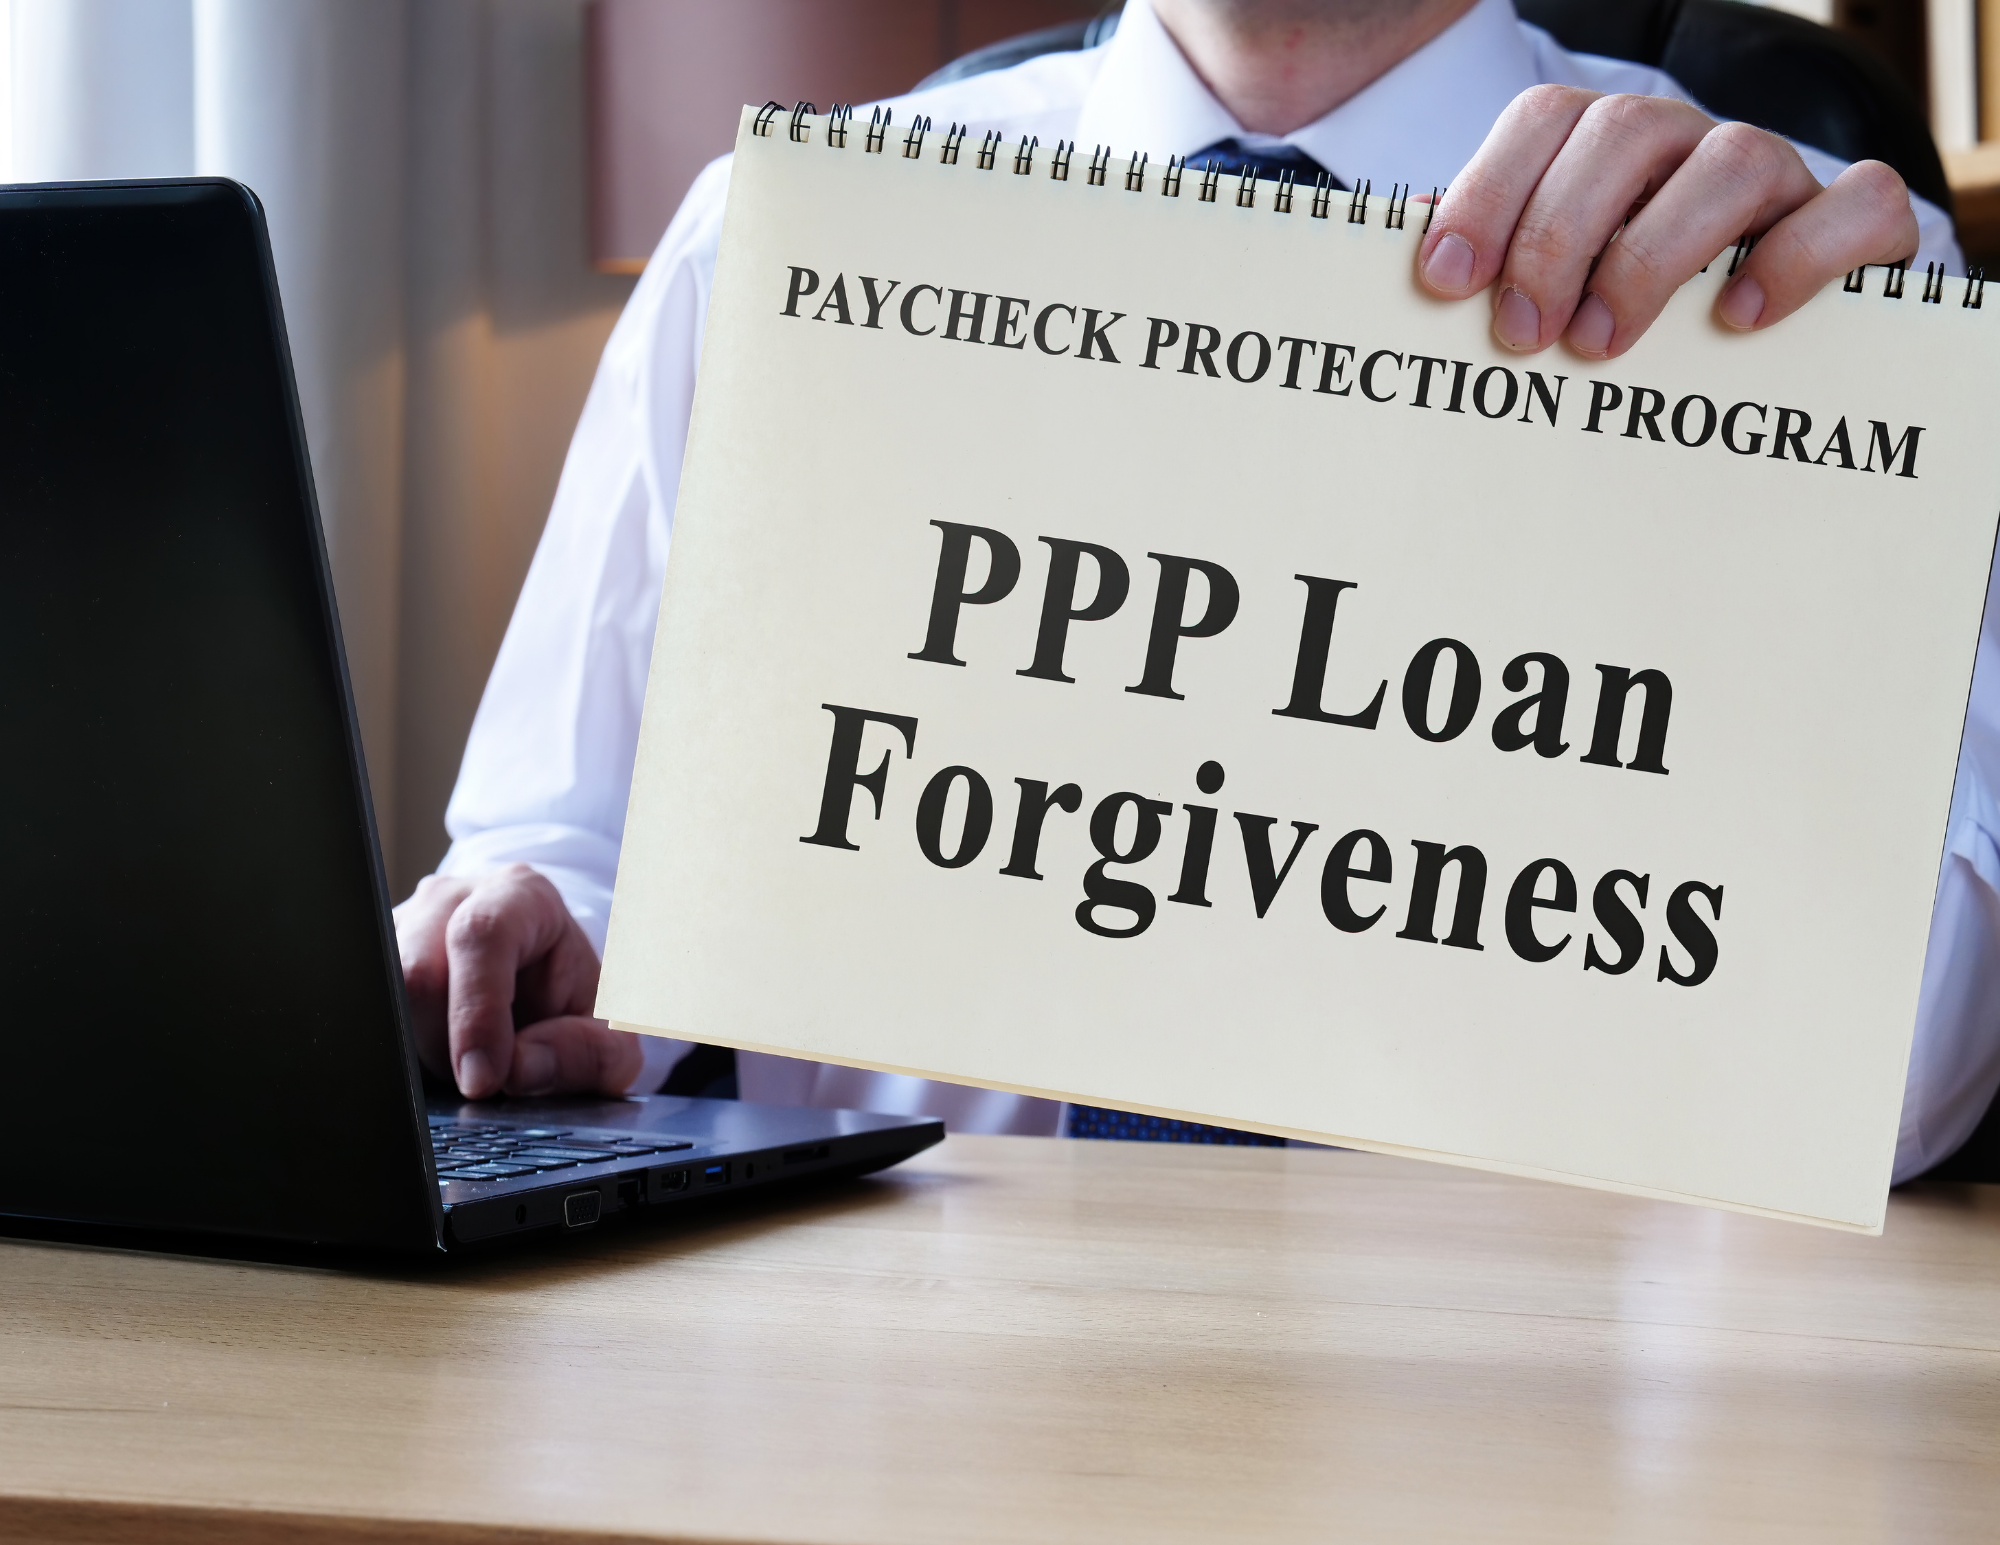 When Should I Apply for PPP forgiveness?